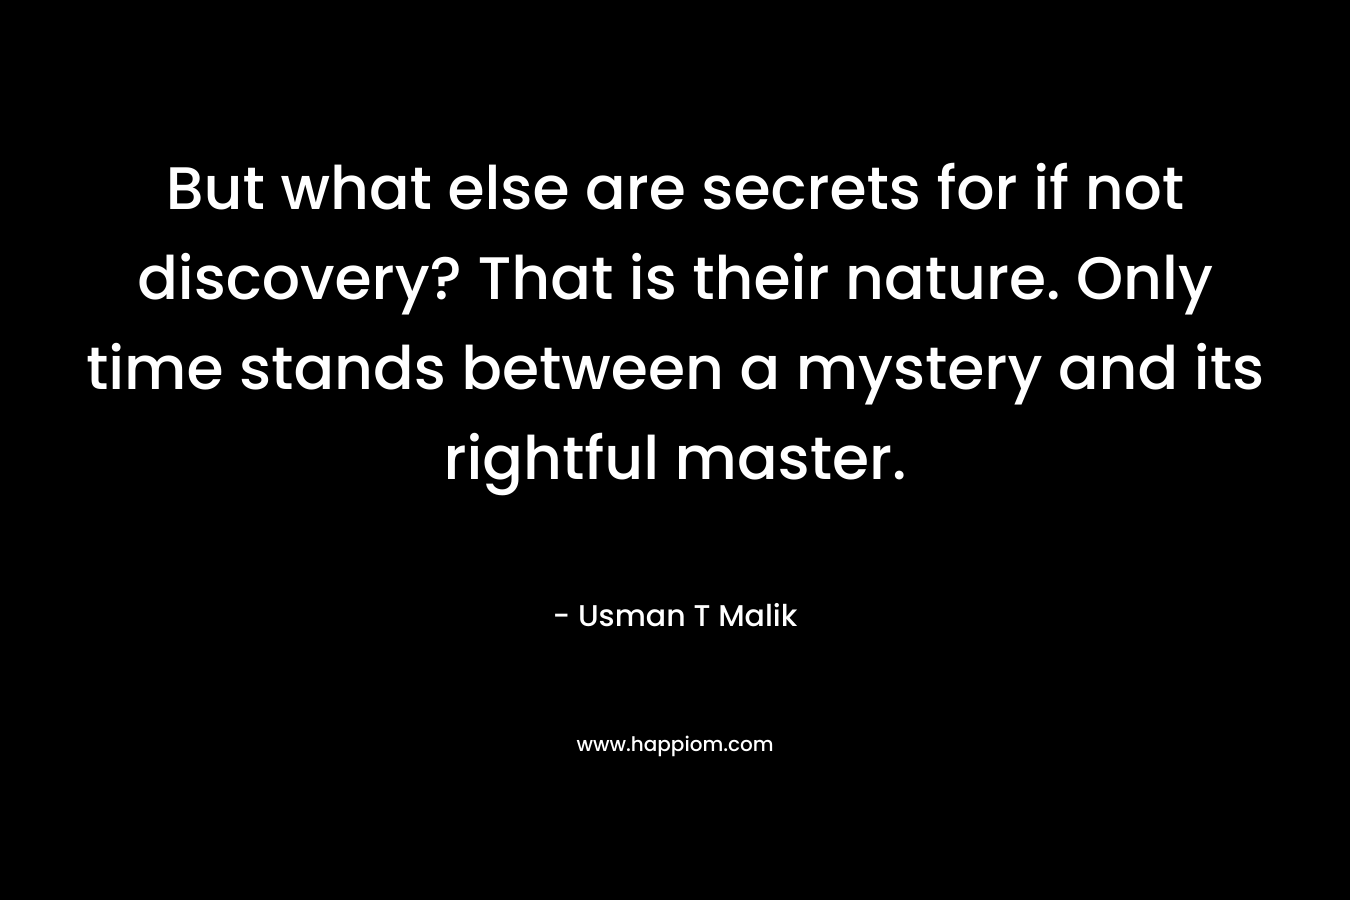 But what else are secrets for if not discovery? That is their nature. Only time stands between a mystery and its rightful master.